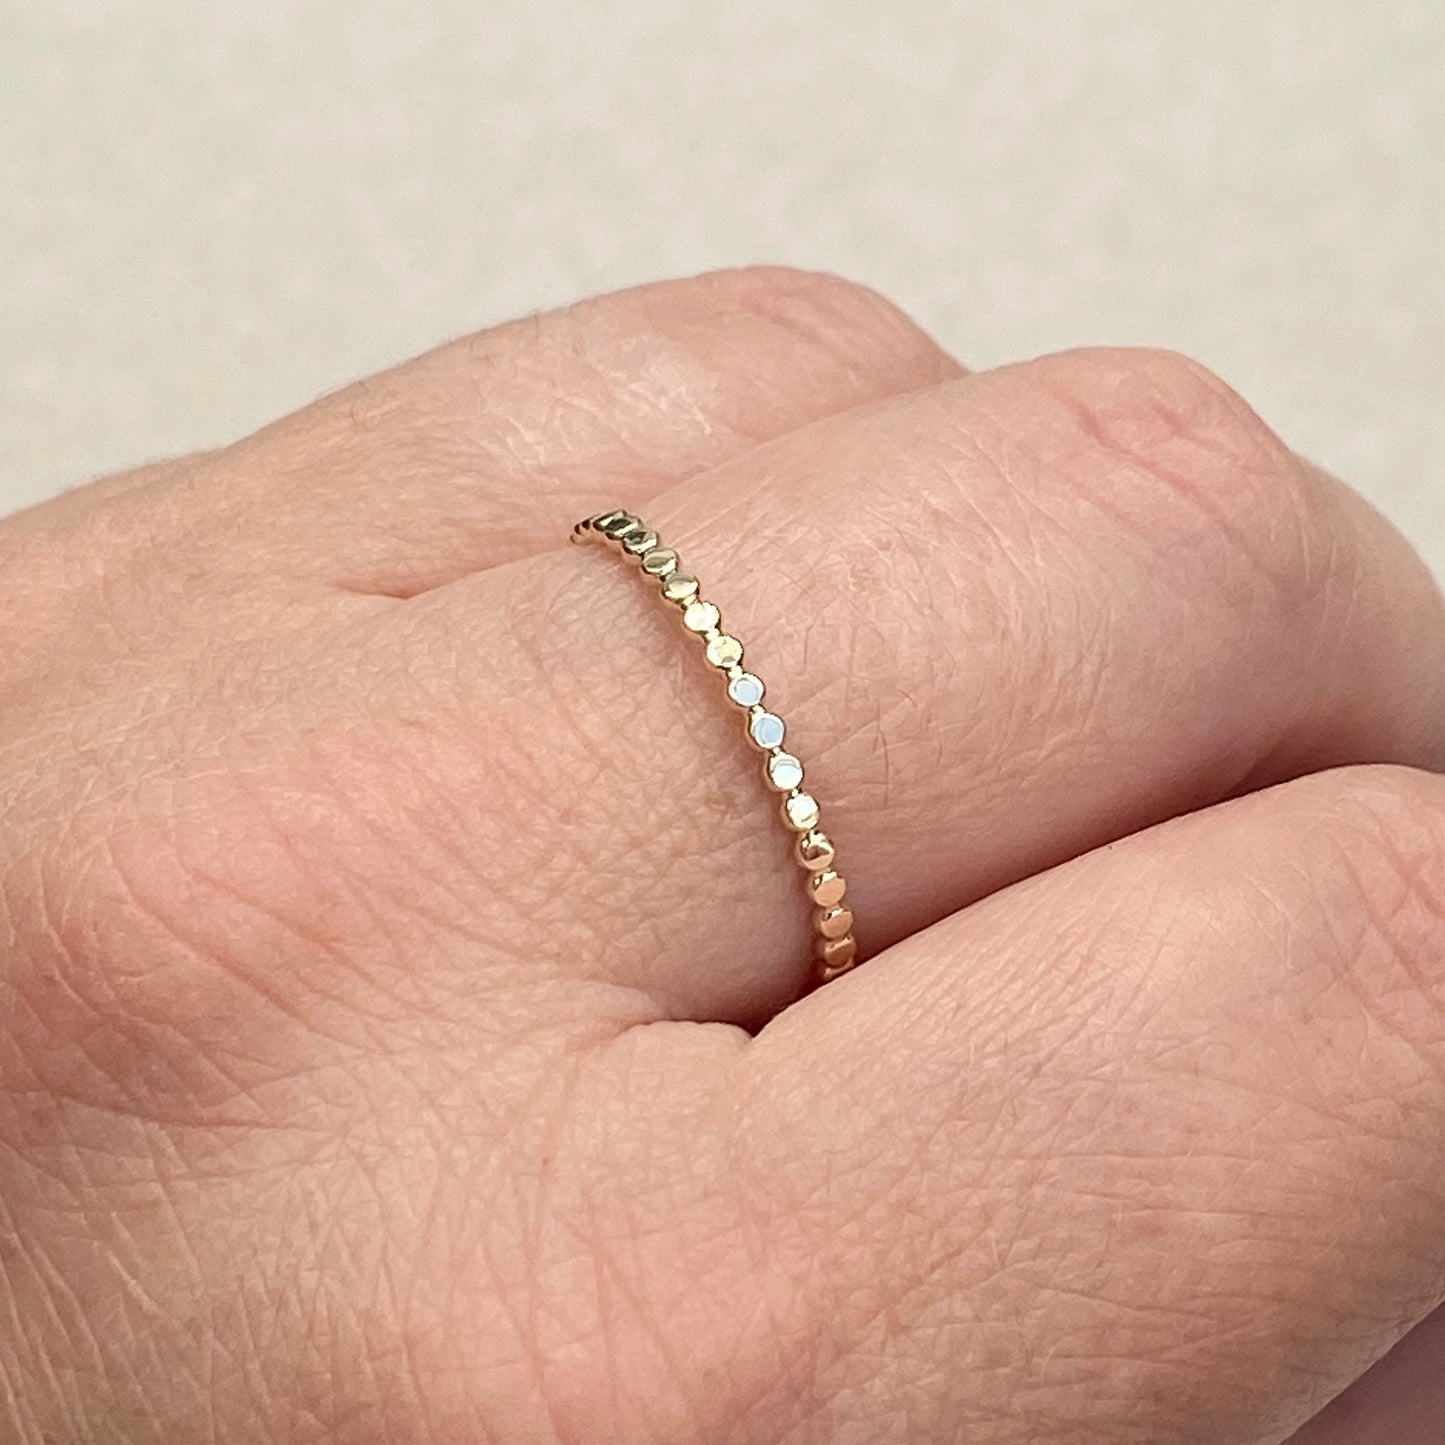 Handmade to order - 9ct solid yellow gold 1.5mm flat bead skinny ring